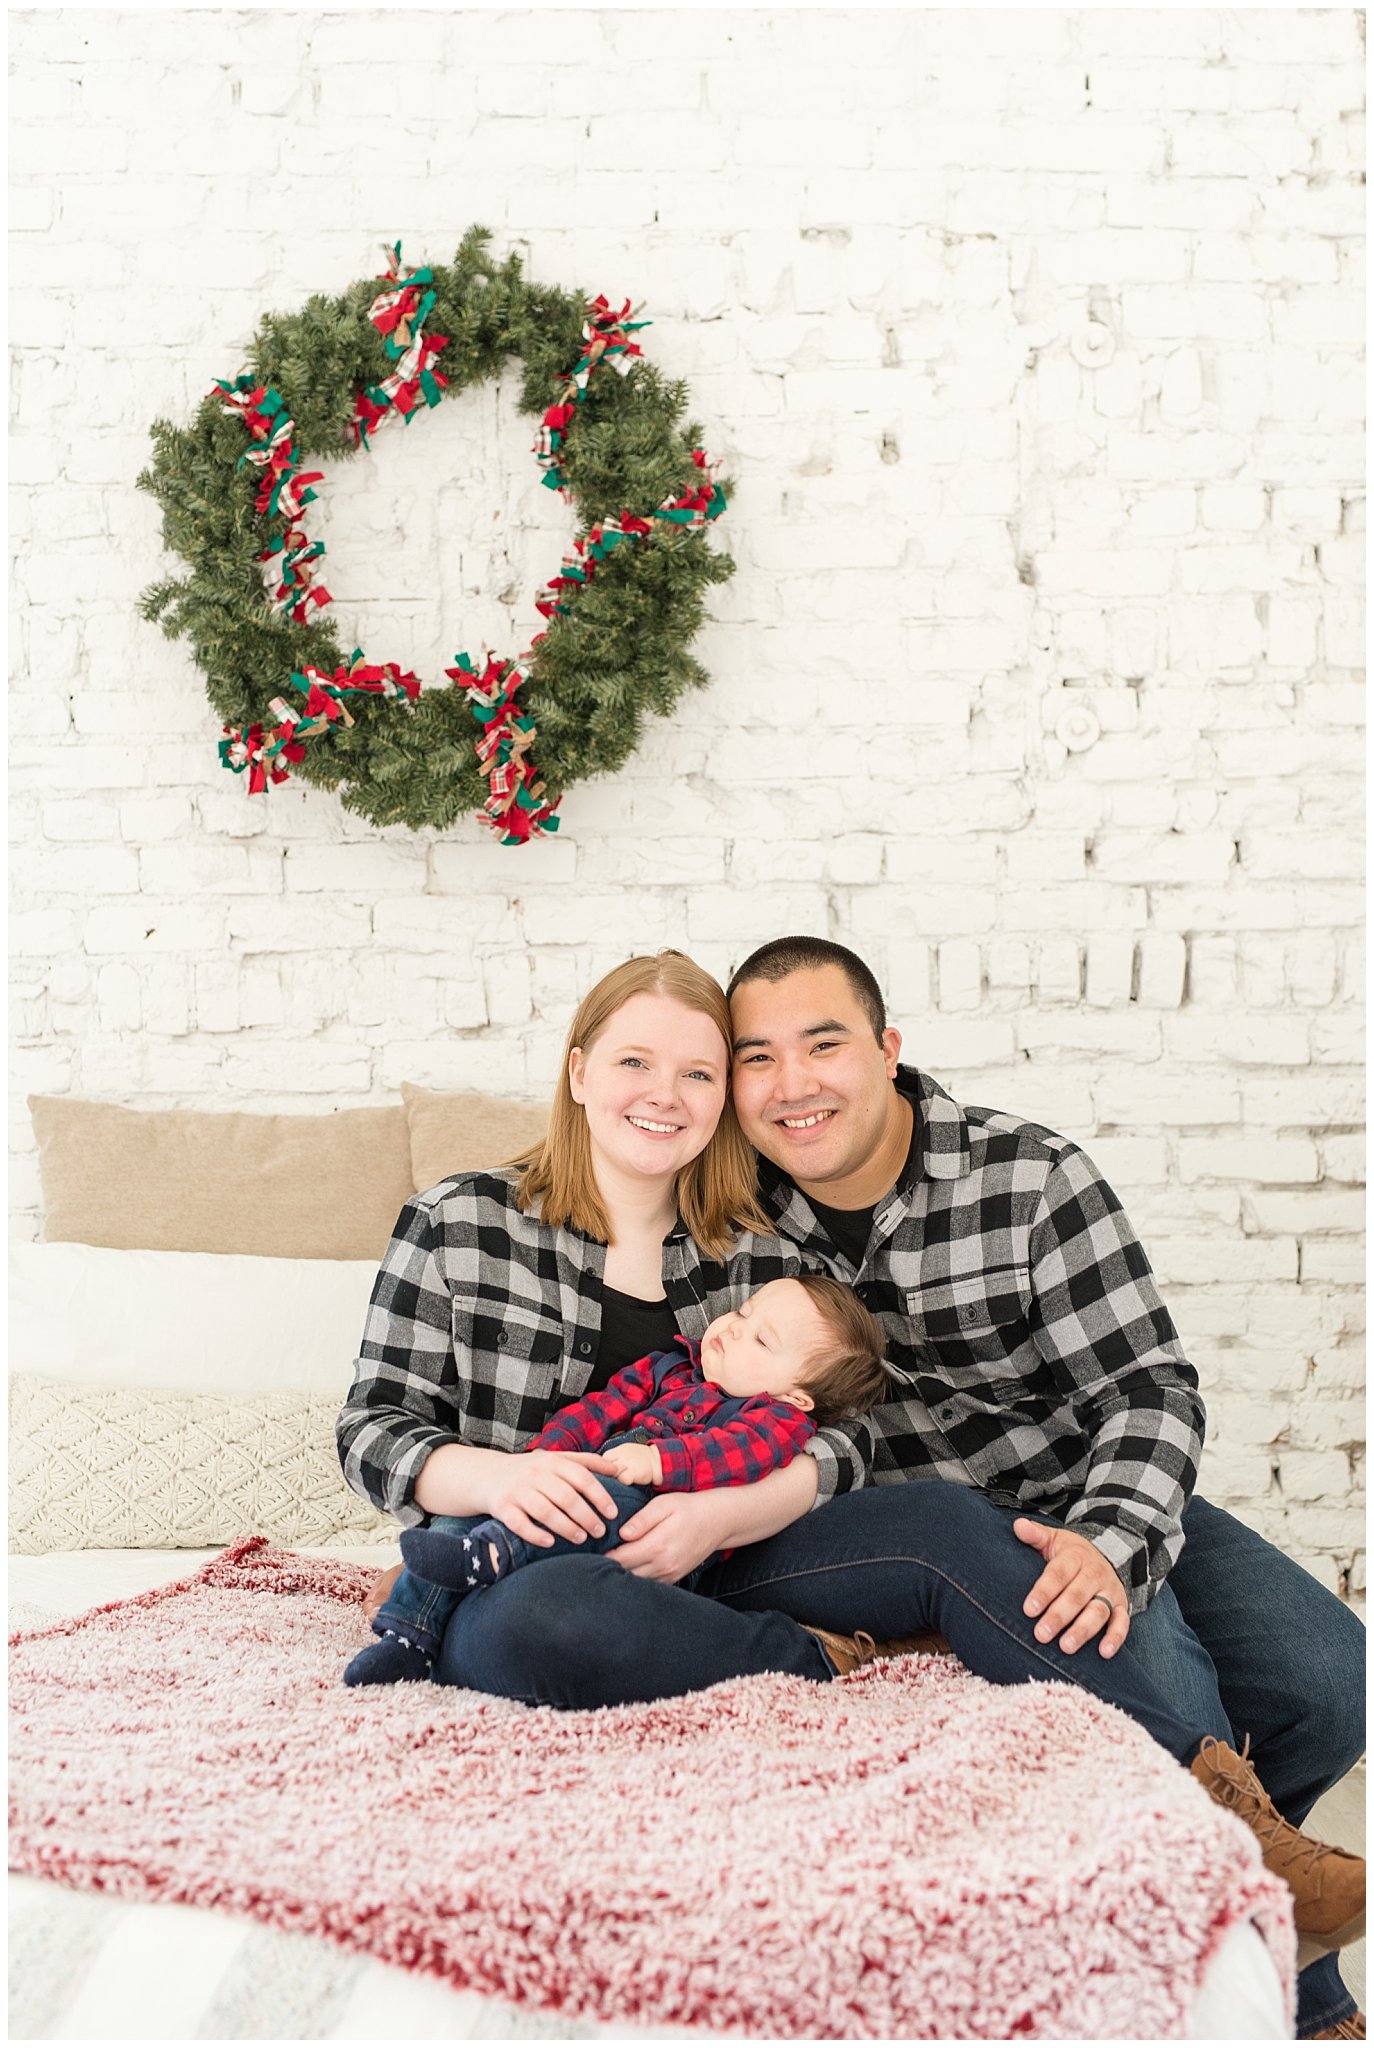 Parents sit on bed with baby boy while he sleeps | Family Christmas session at the 5th floor | Utah Photographers | Jessie and Dallin Photography